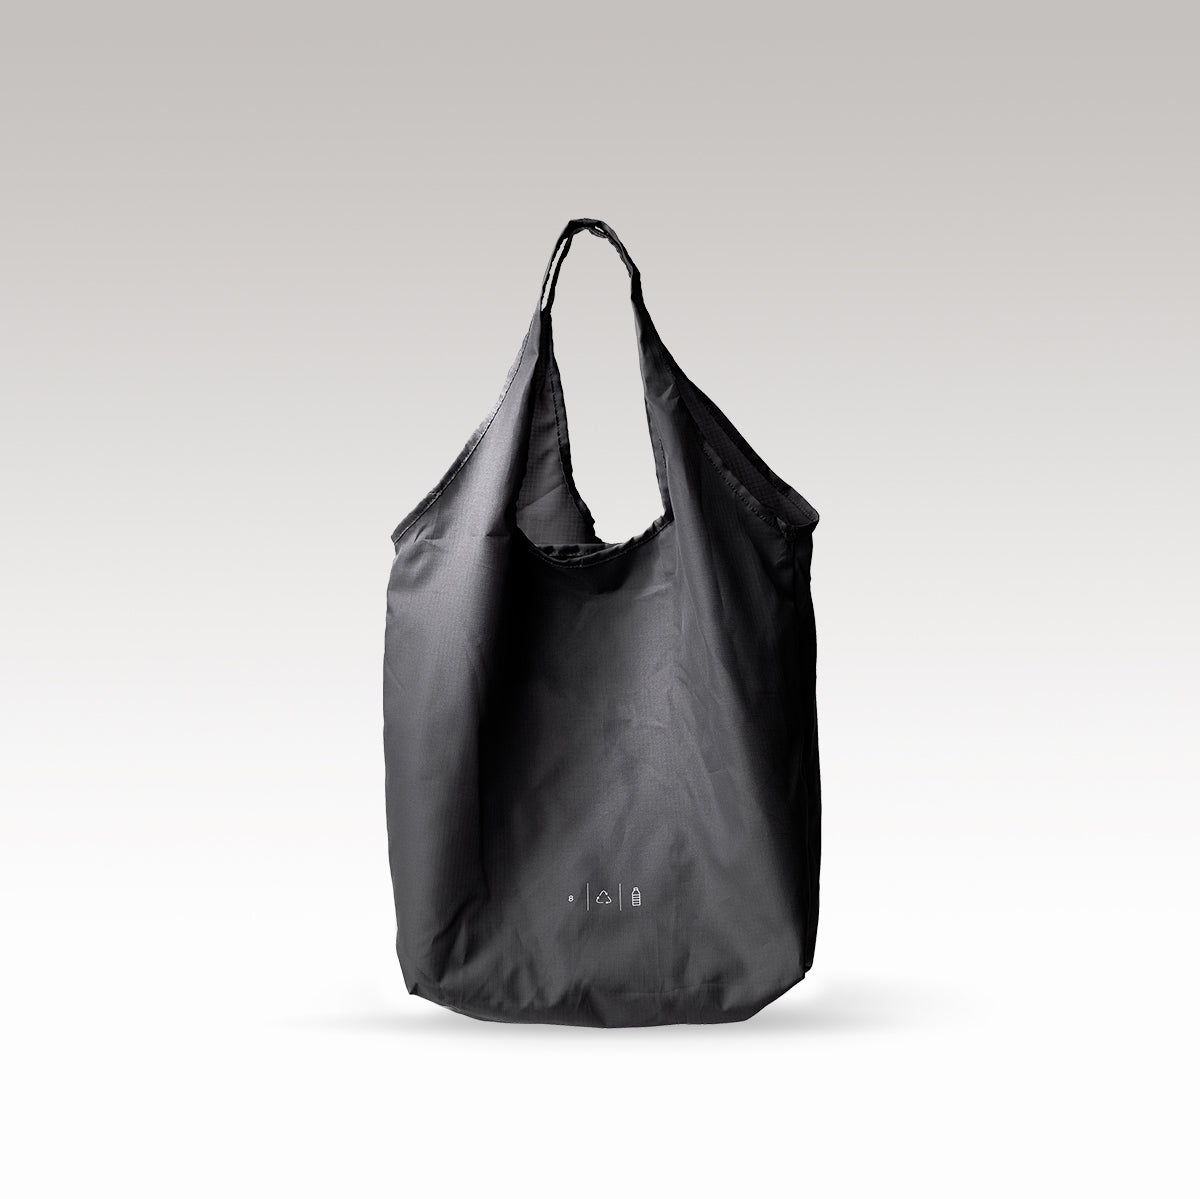 Shopping Tote 1.2 Tote Bag GROUNDTRUTH